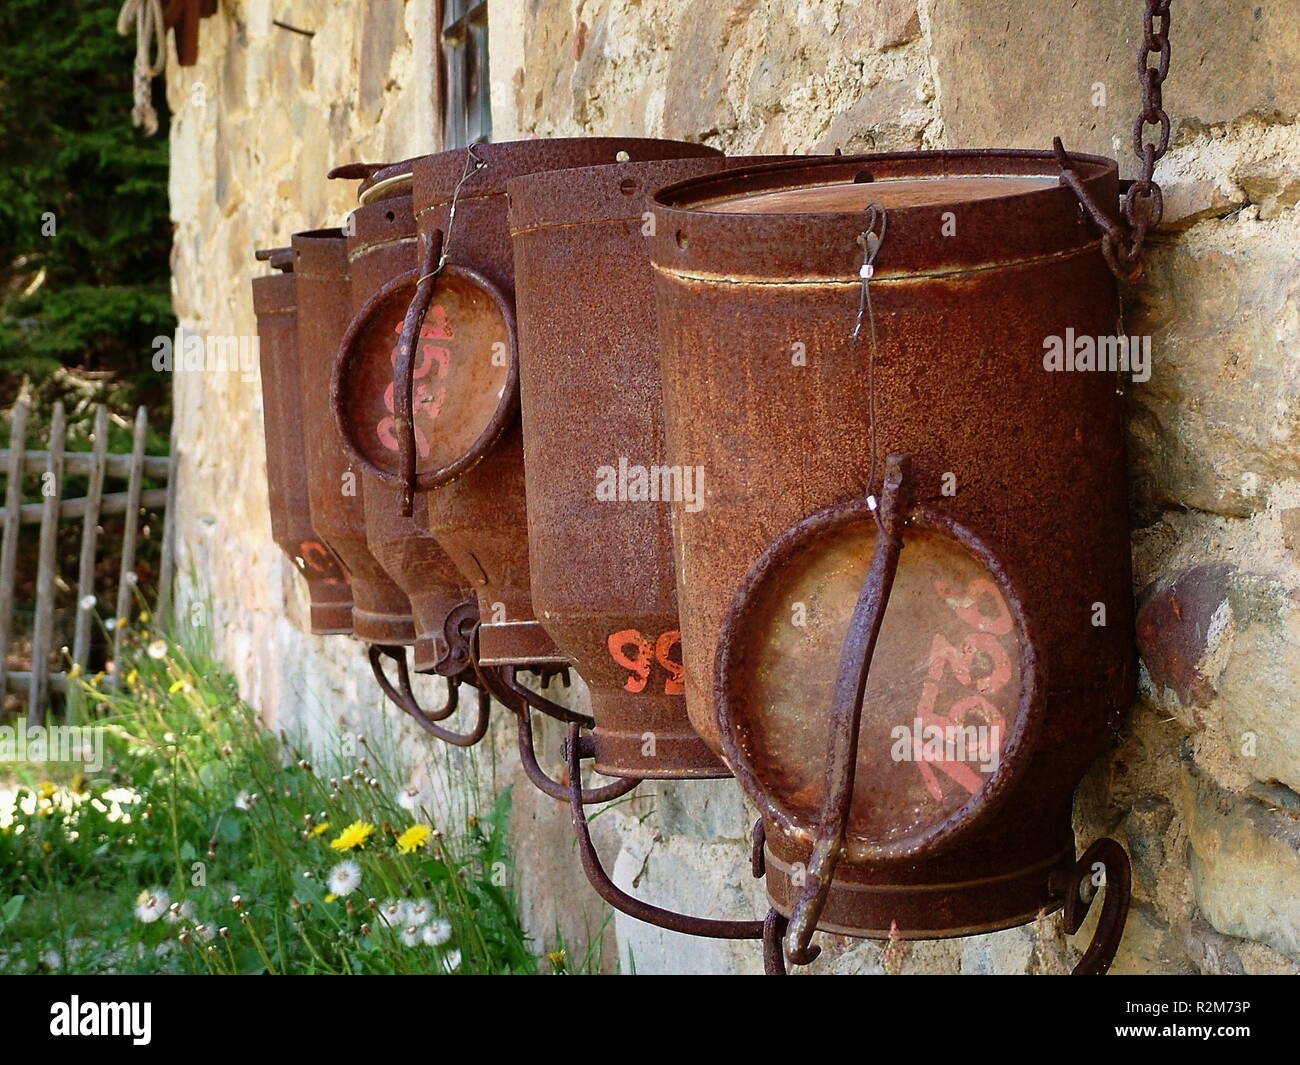 old milk cans Stock Photo